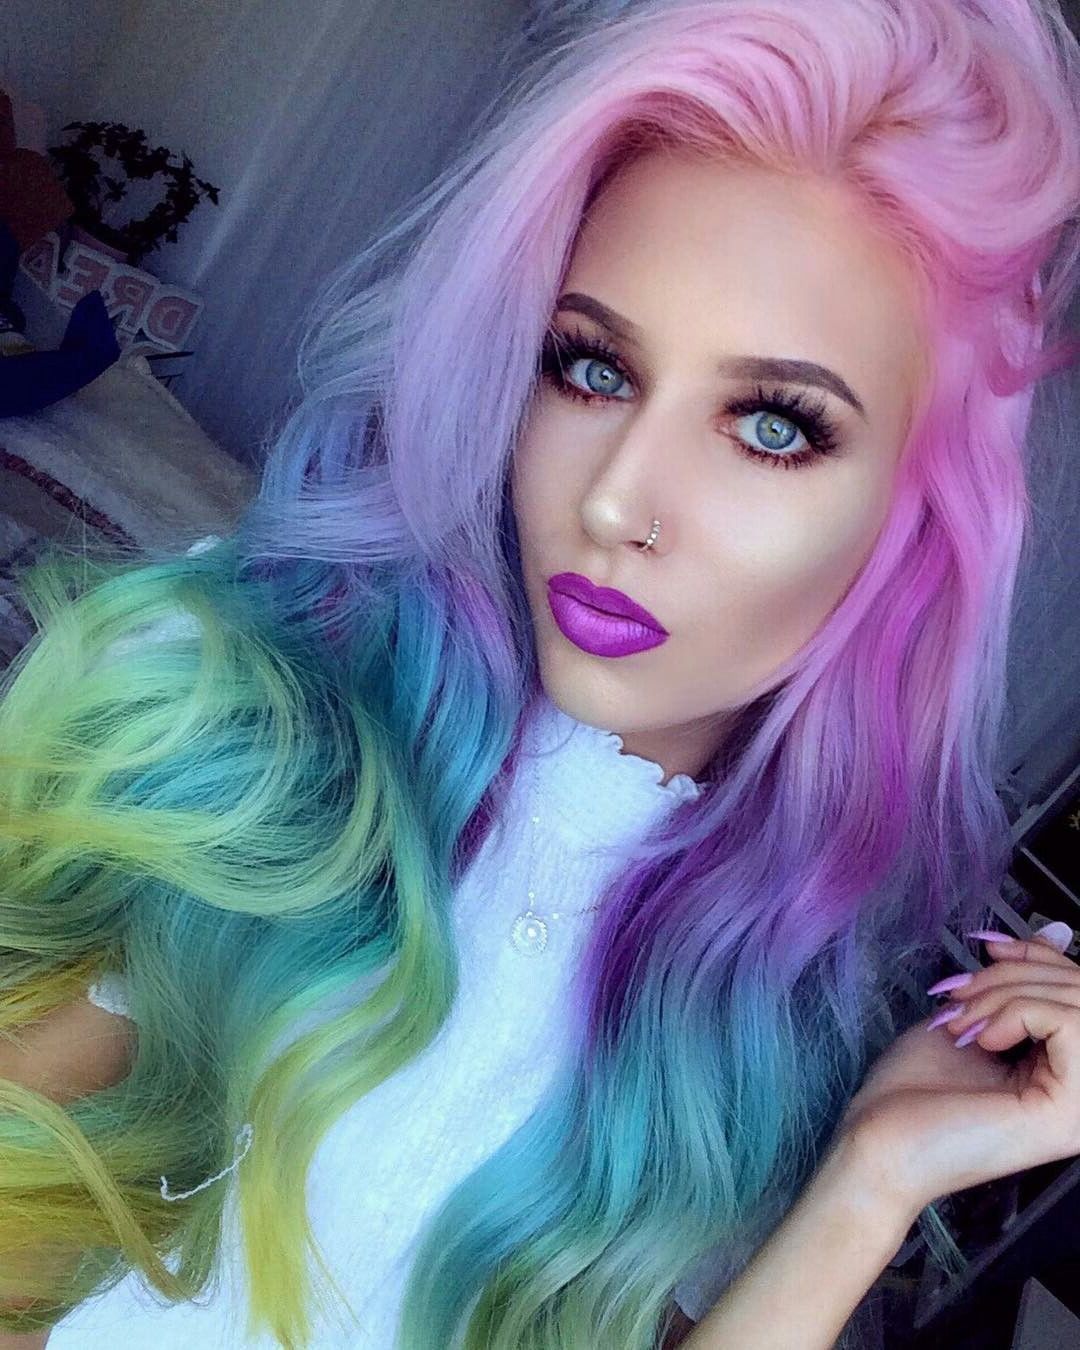 Pastel Rainbow Hair With Regard To Popular Pastel Rainbow Colored Curls Hairstyles (View 20 of 20)